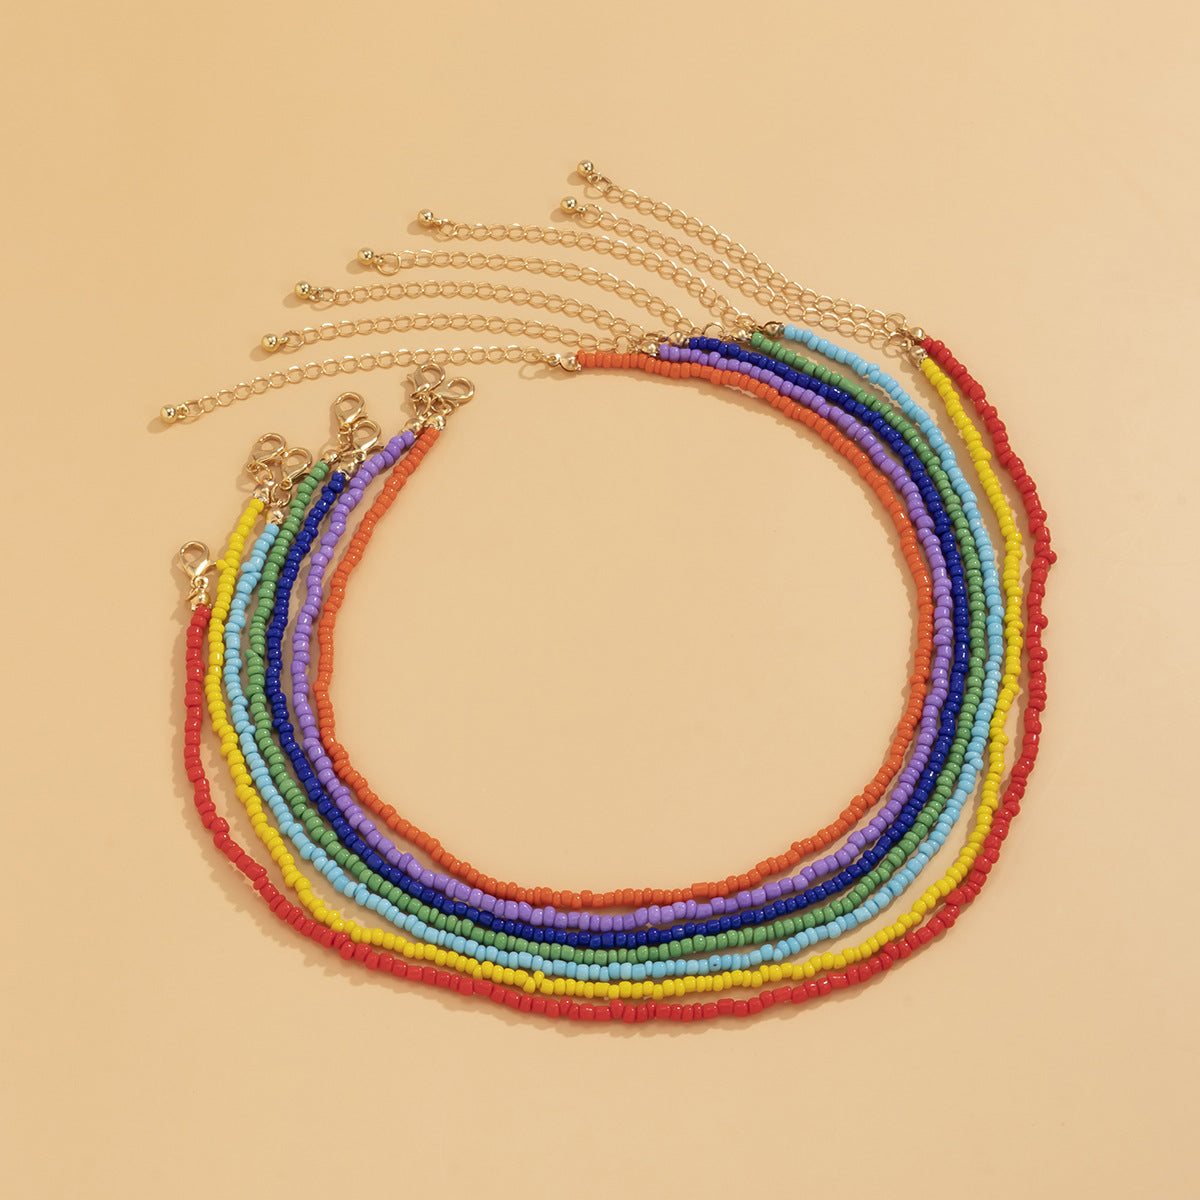 Gorgeous 7-Piece Beaded Necklace Set - Perfect for Women of All Ages!